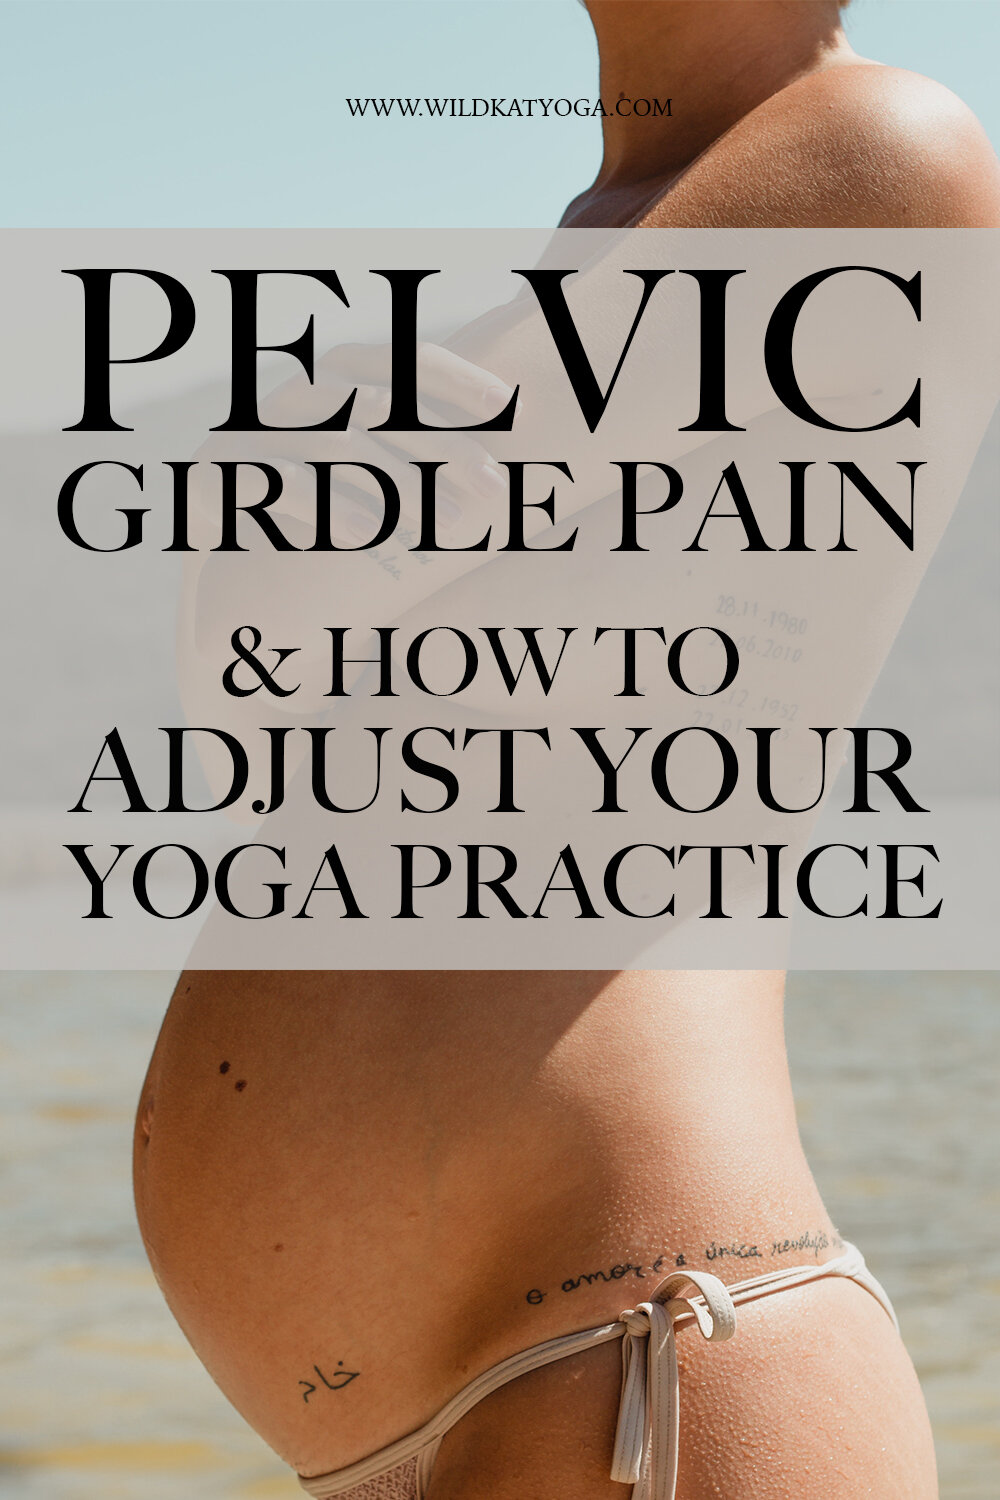 How to adjust your yoga practise for Pelvic Girdle Pain — Wild Kat